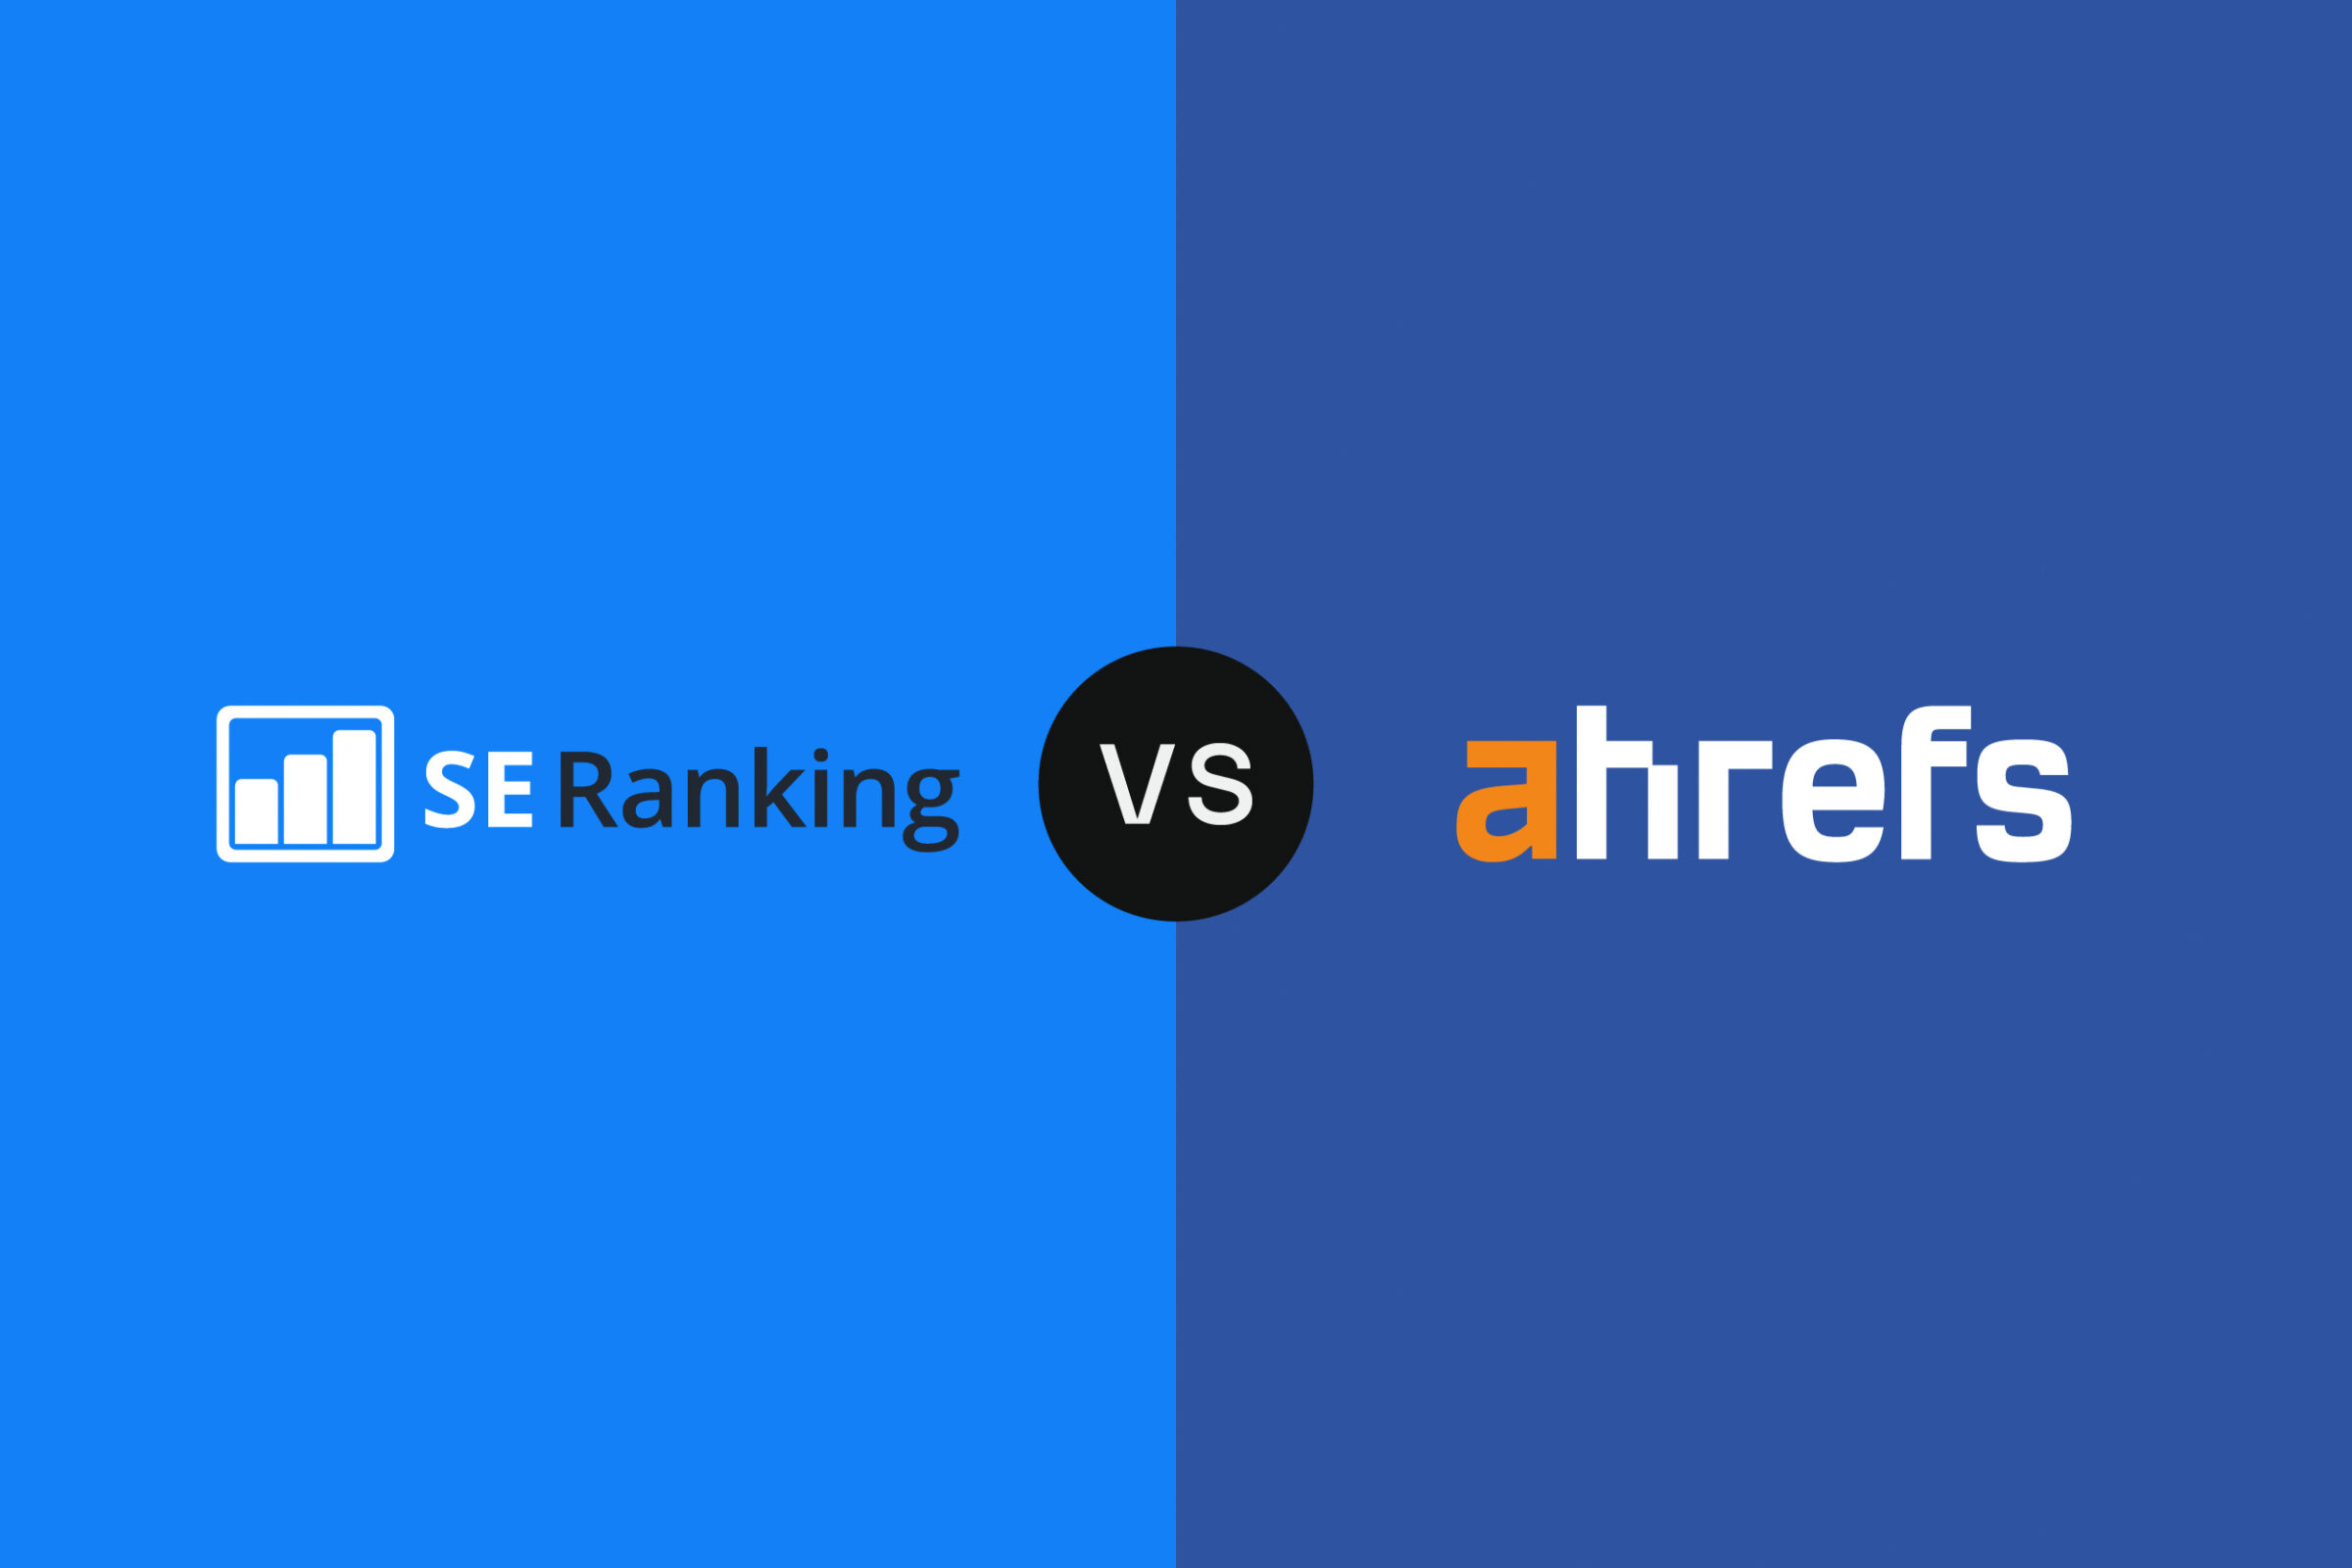 An image showing the SE Ranking and Ahrefs logo against each other using the word "vs"